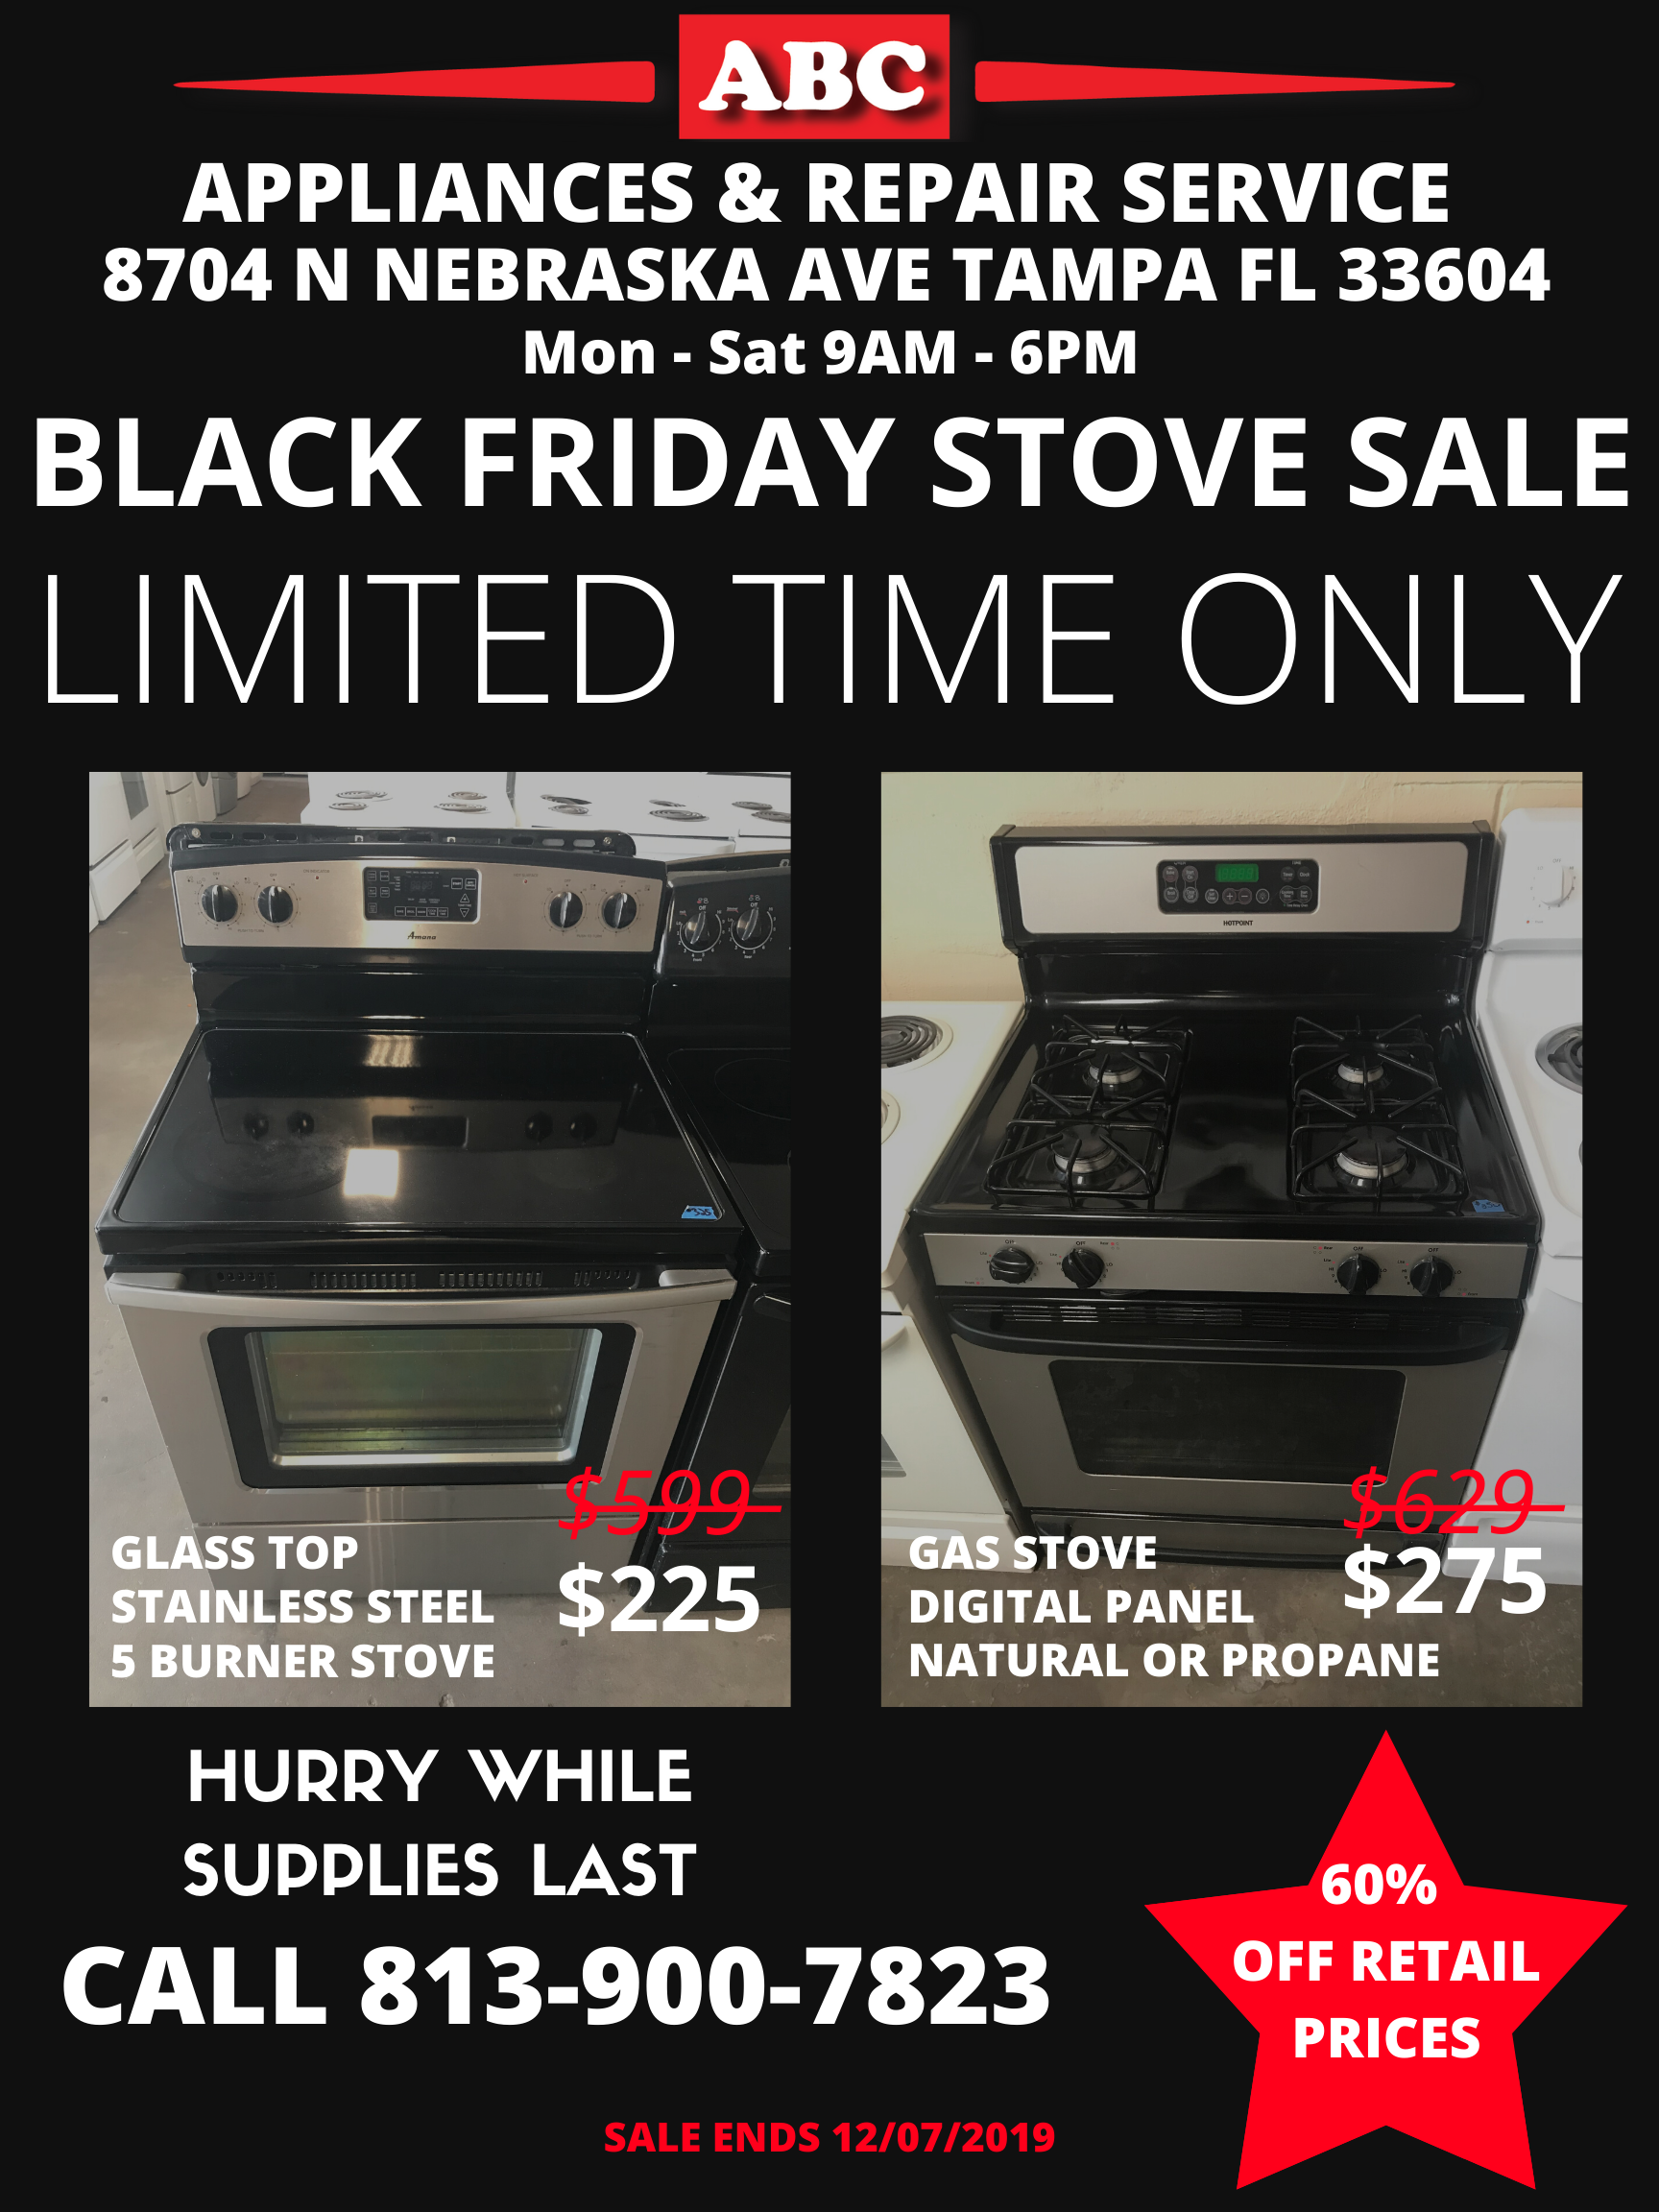 BLACK FRIDAY STOVE DEALS 2019 - What Is Black Friday Gas Stove Deals